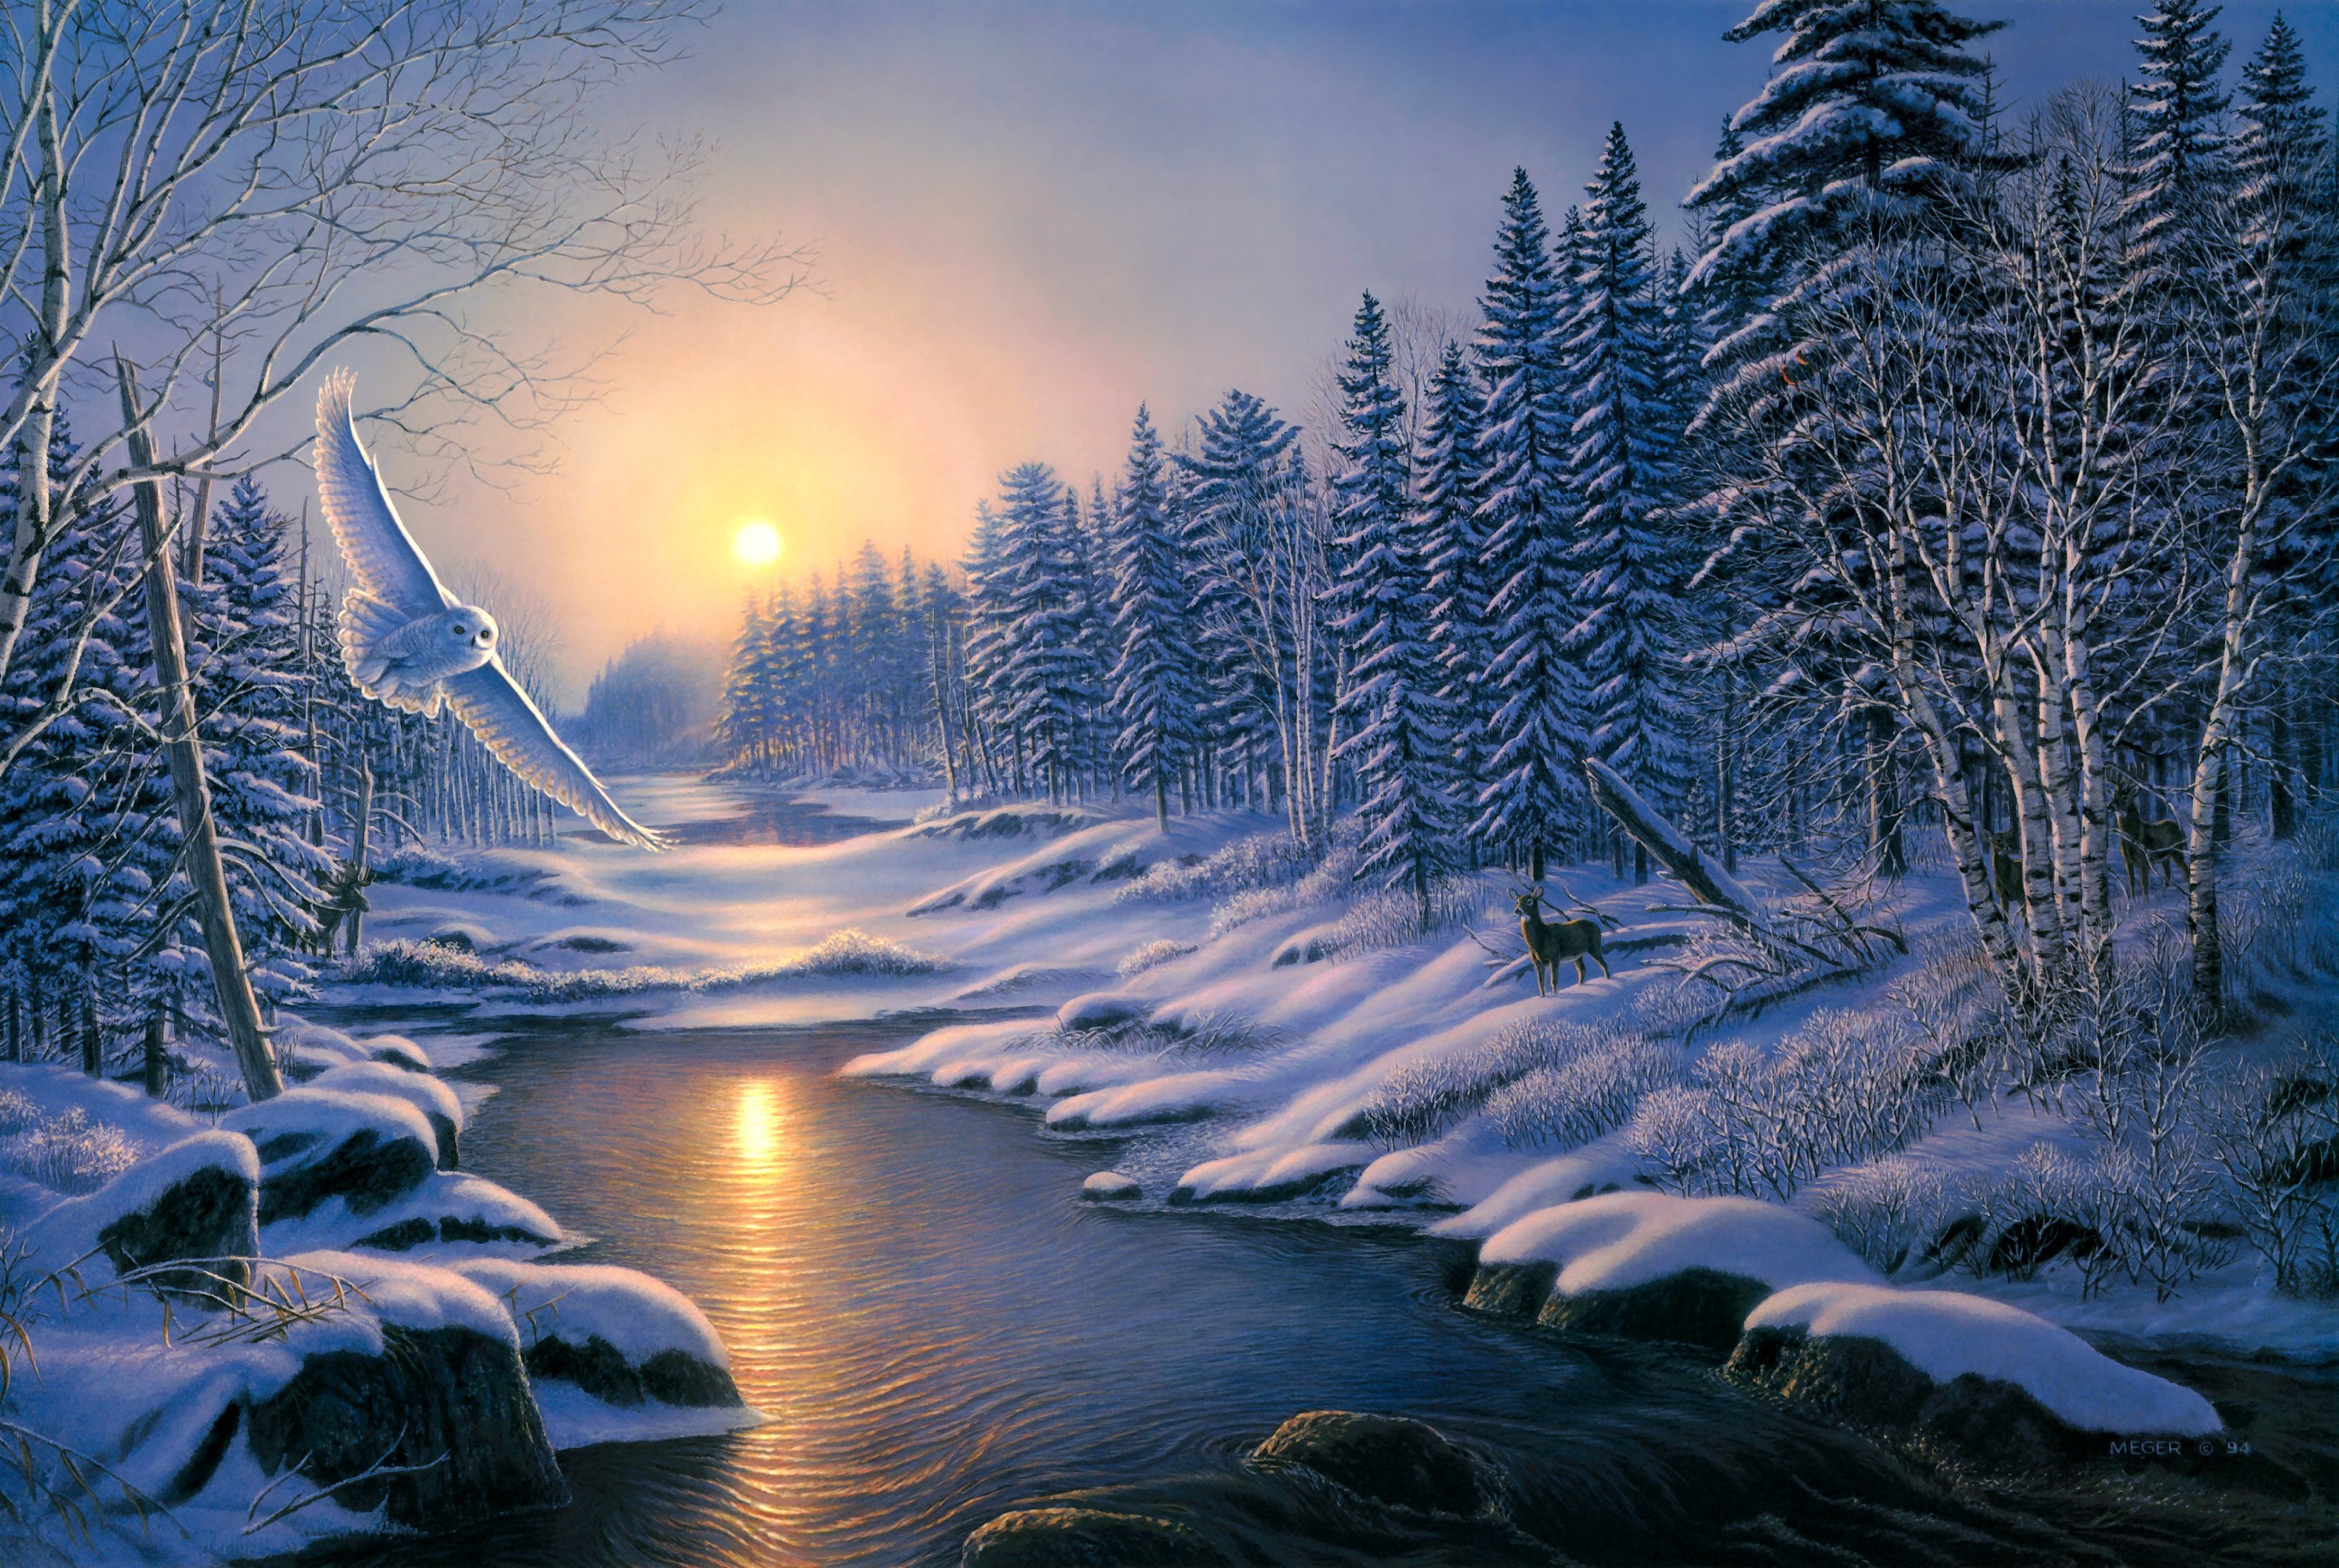 painting, Solstice, Sunset, Winter, Snow, Nature, Forest, Spruce, Birch, River, Owl, Deer Wallpaper